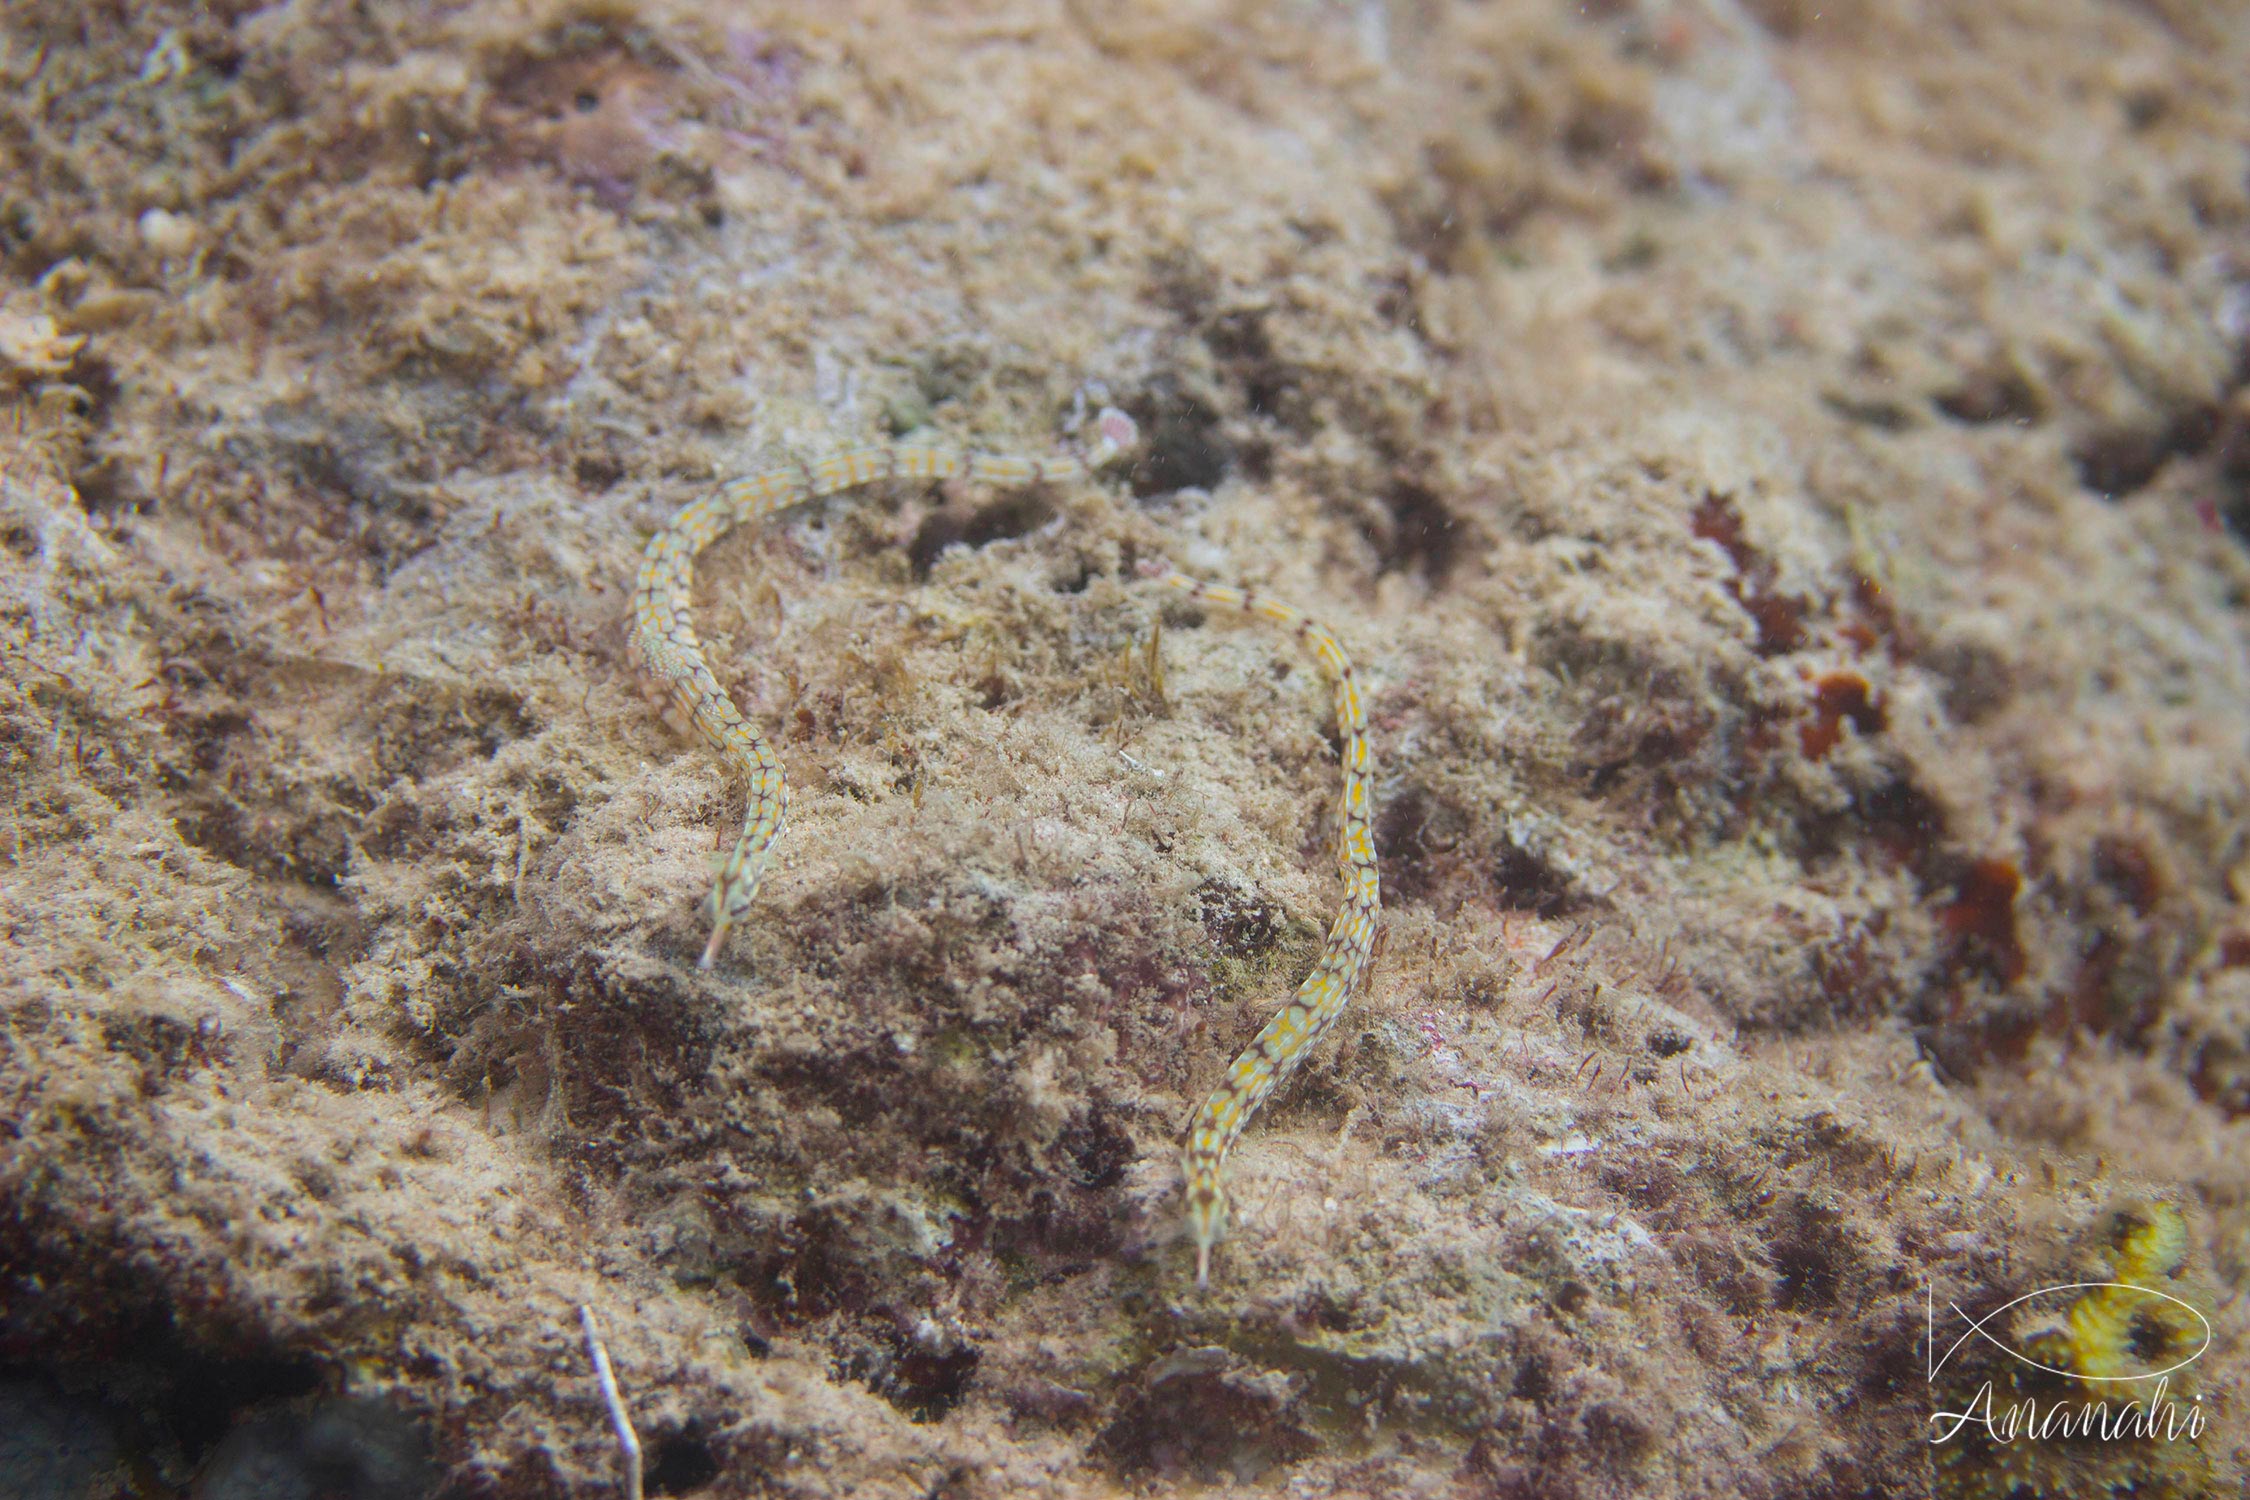 Network pipefish of Mayotte